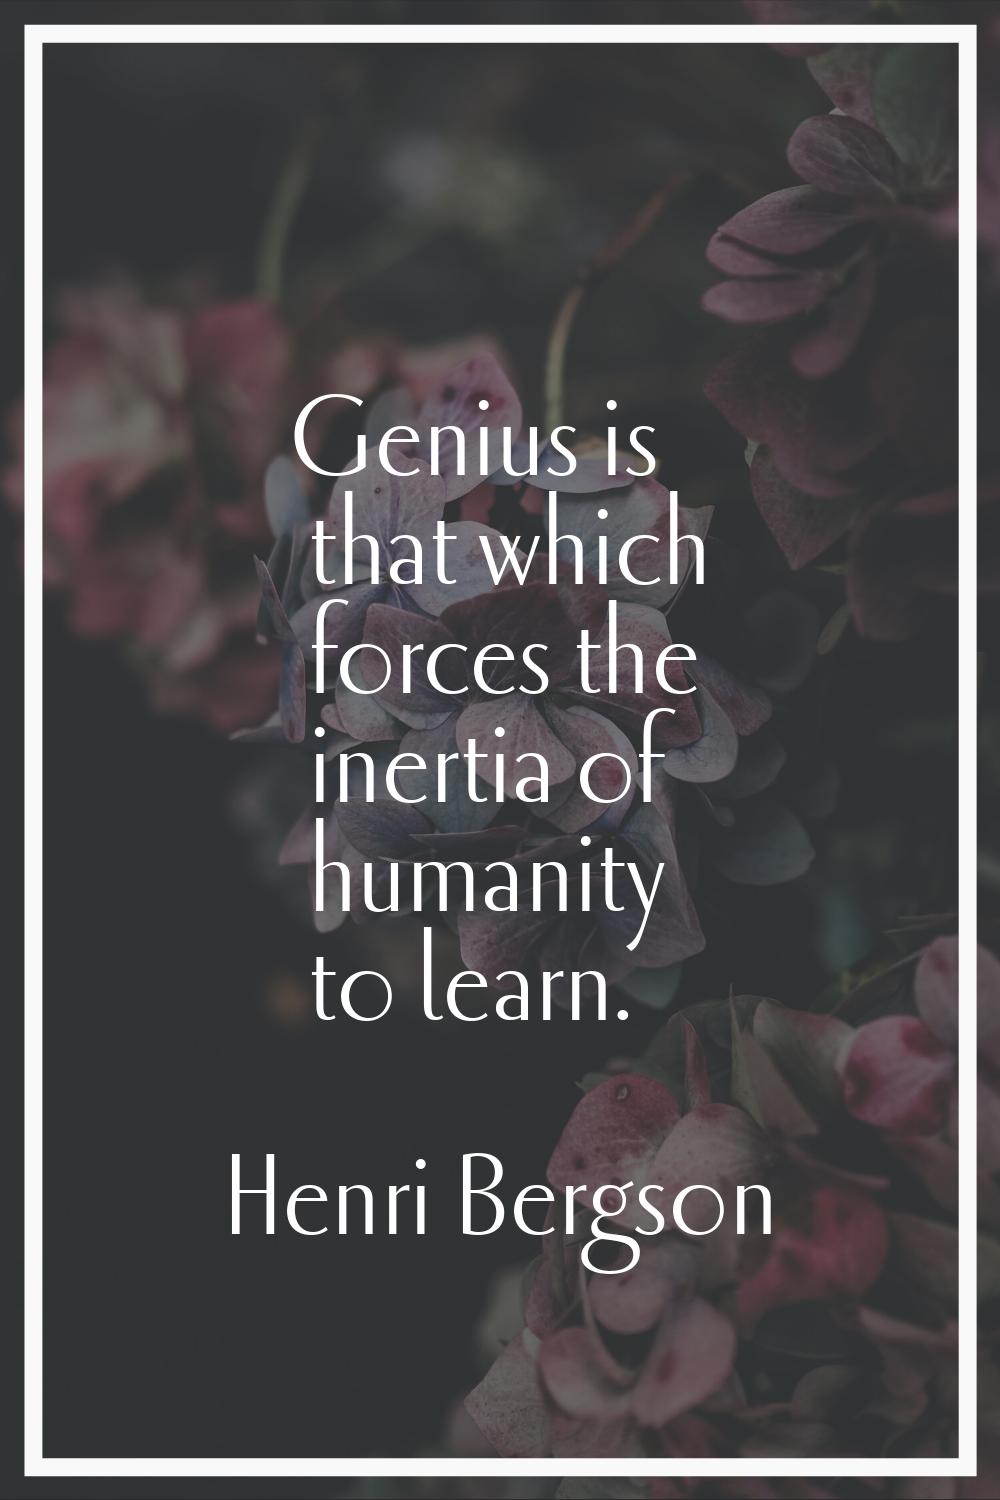 Genius is that which forces the inertia of humanity to learn.